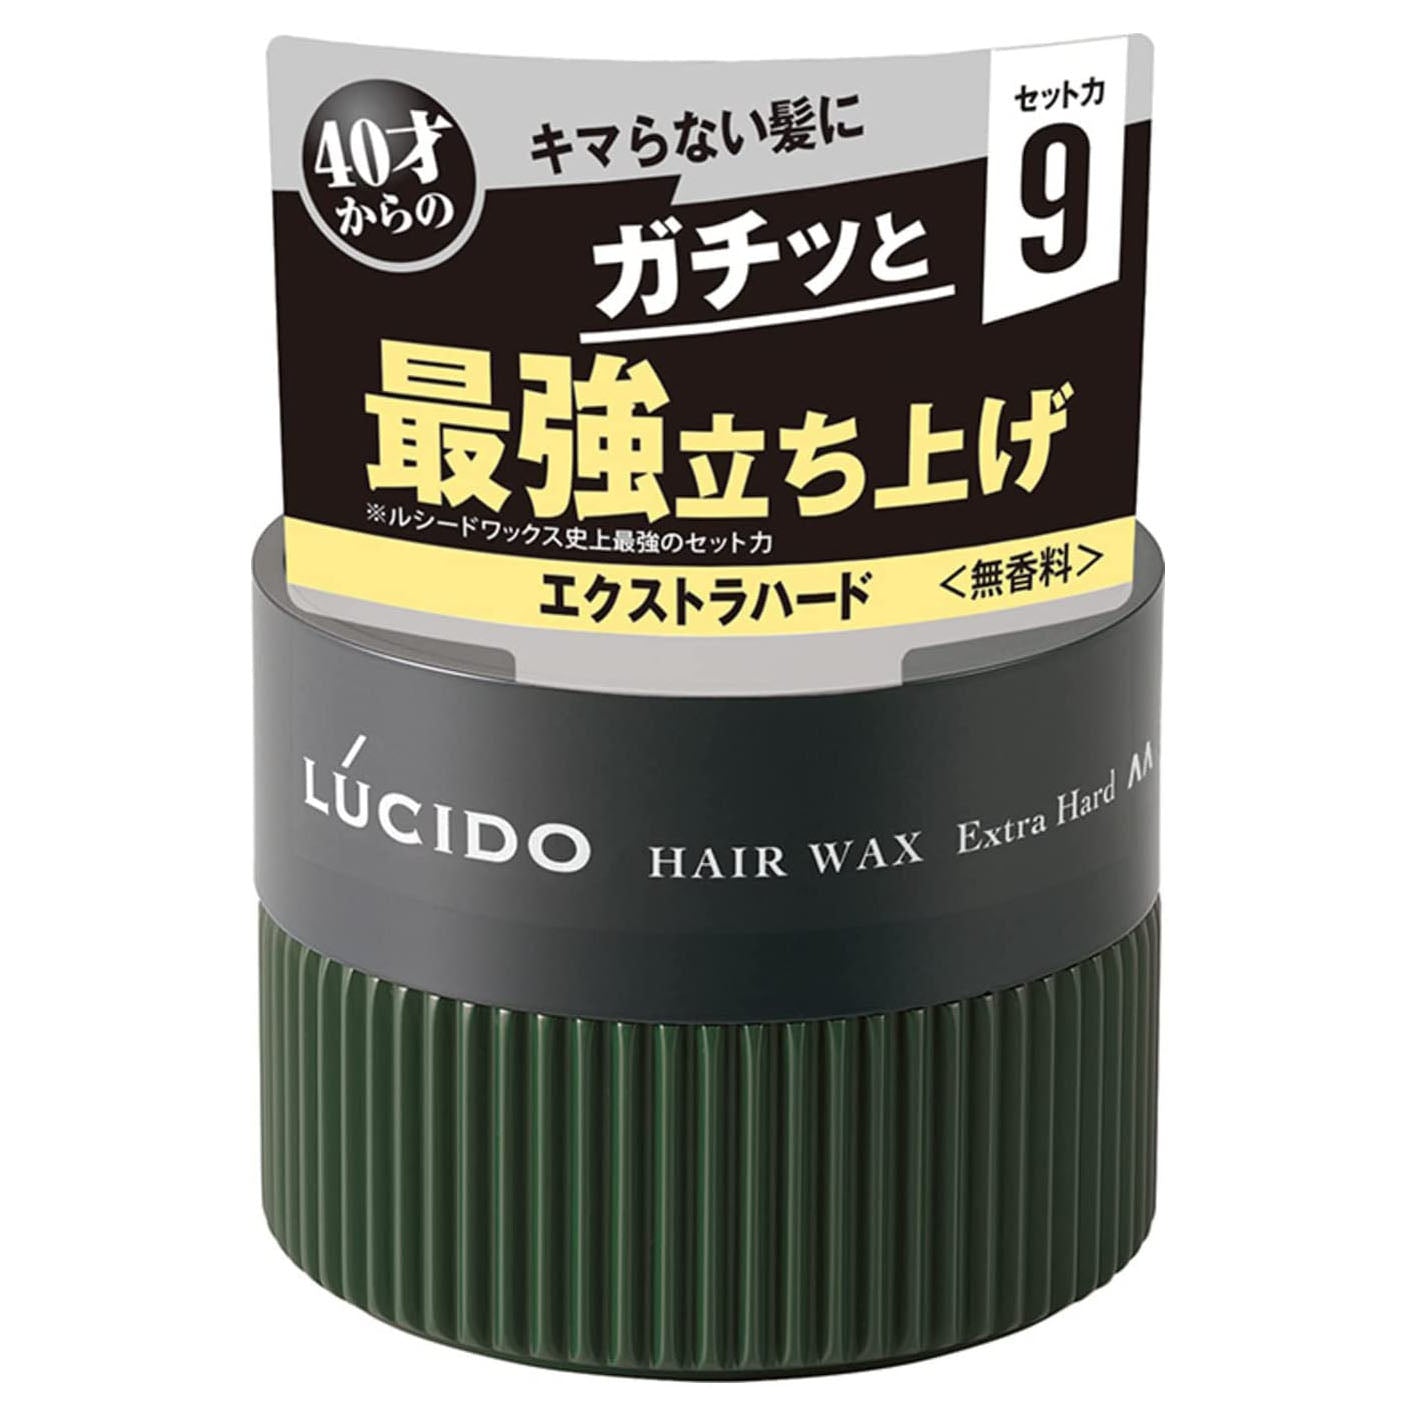 Lucido Hair Wax 80g - Extra Hard - Harajuku Culture Japan - Japanease Products Store Beauty and Stationery